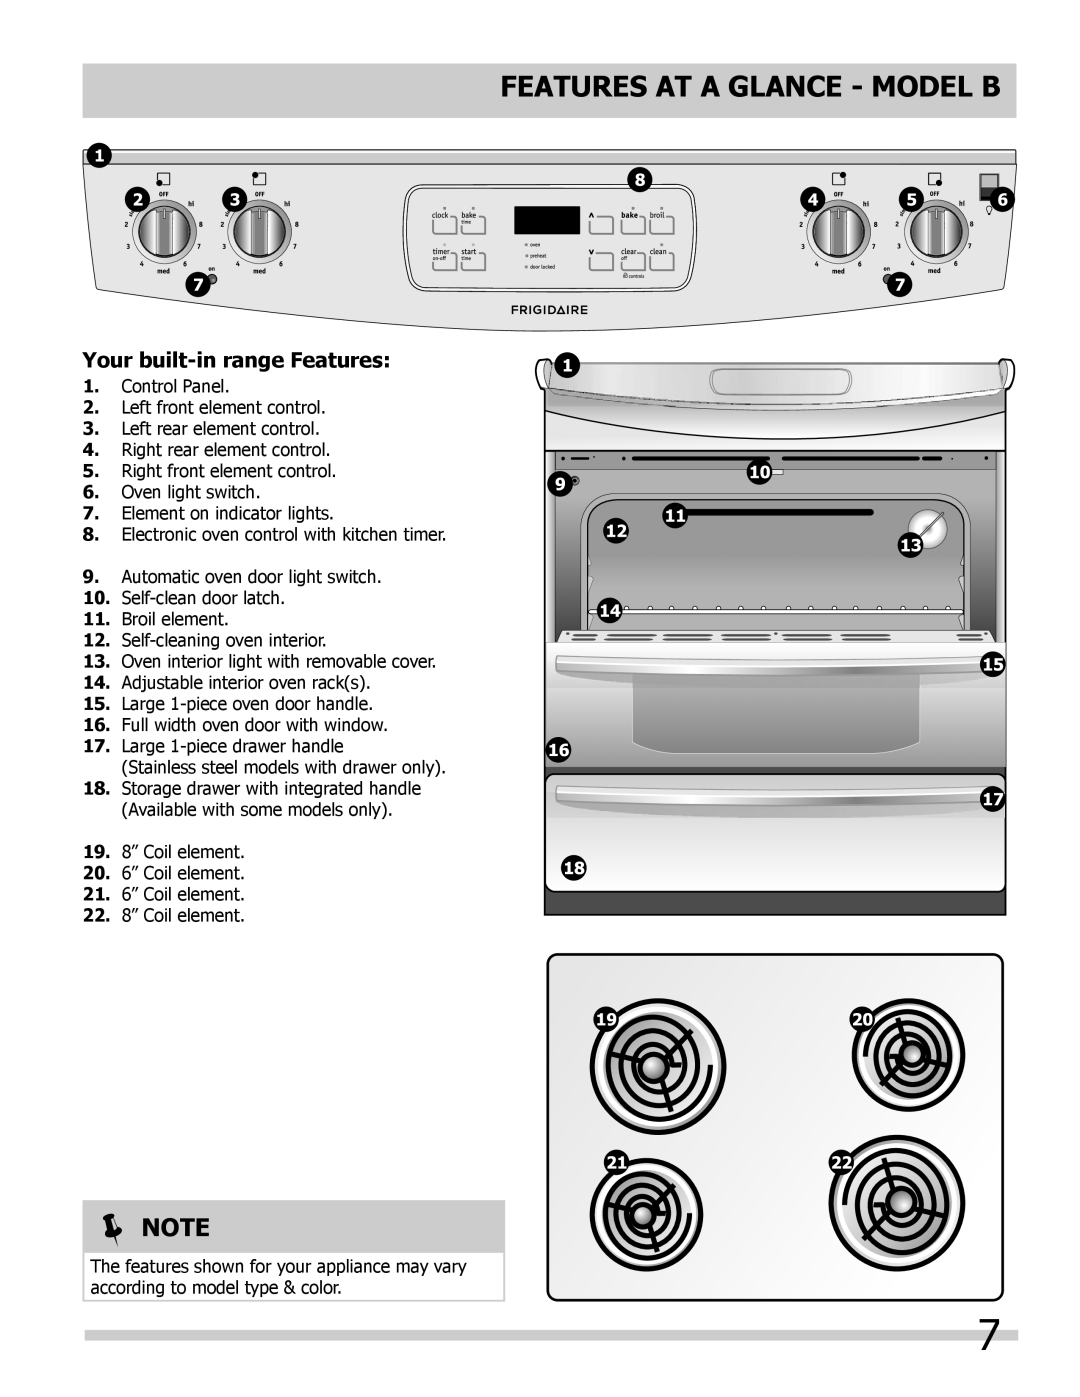 Frigidaire manual FEATURES AT A GLANCE - mODEL B, Note, Your built-inrange Features 